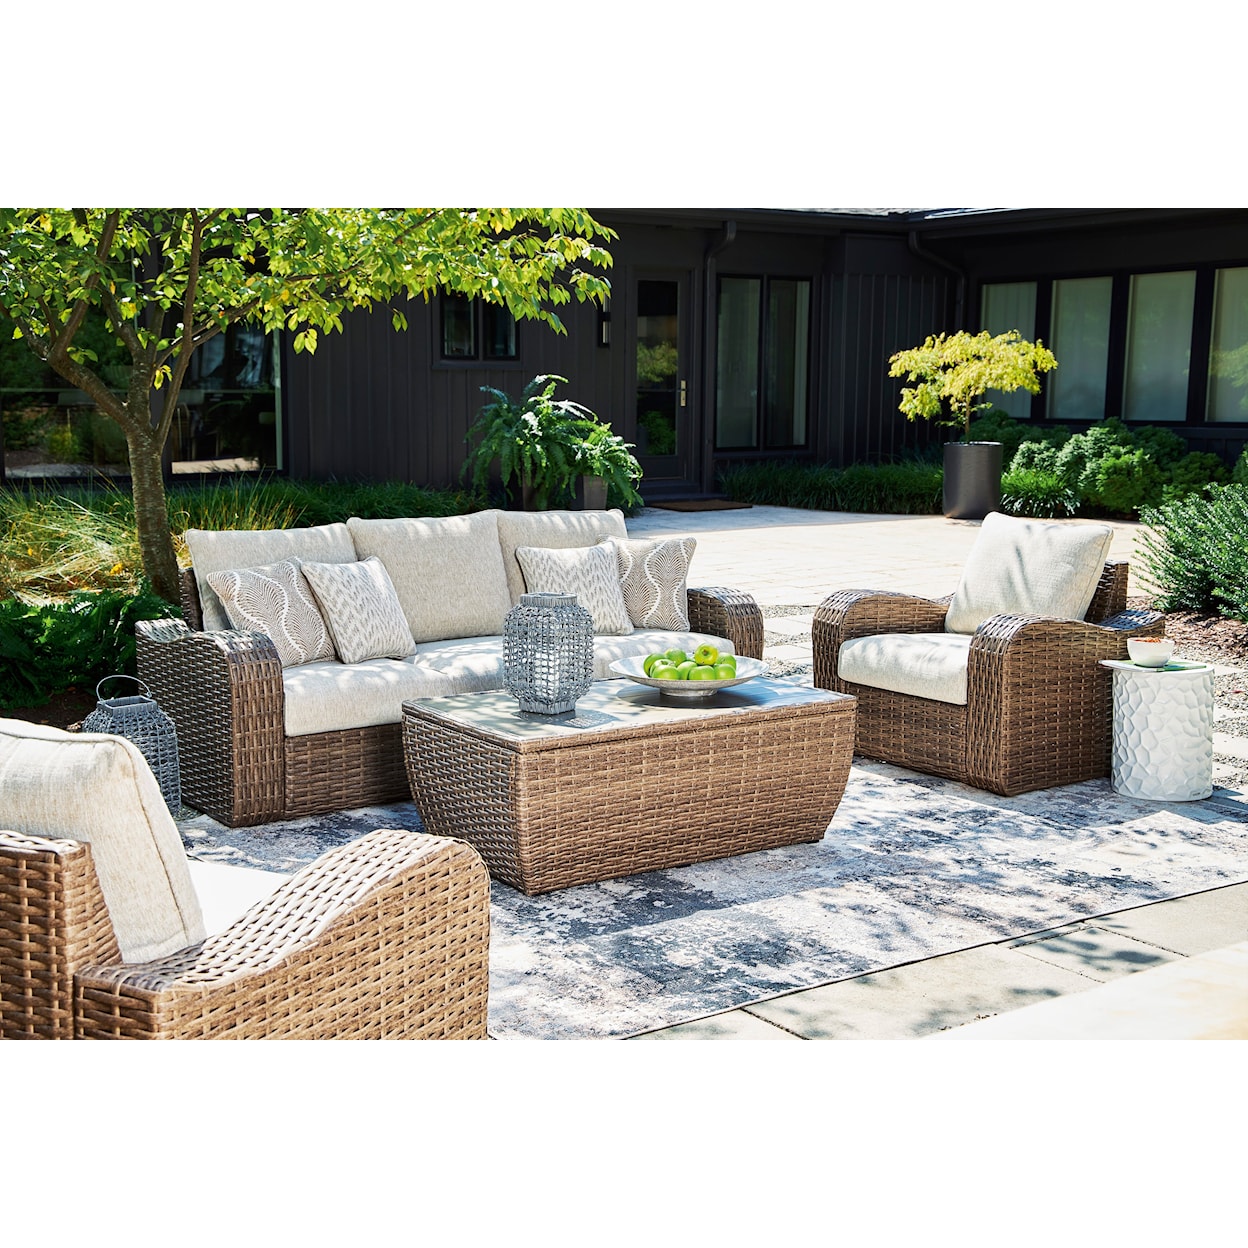 Signature Design by Ashley Sandy Bloom Outdoor Coffee Table